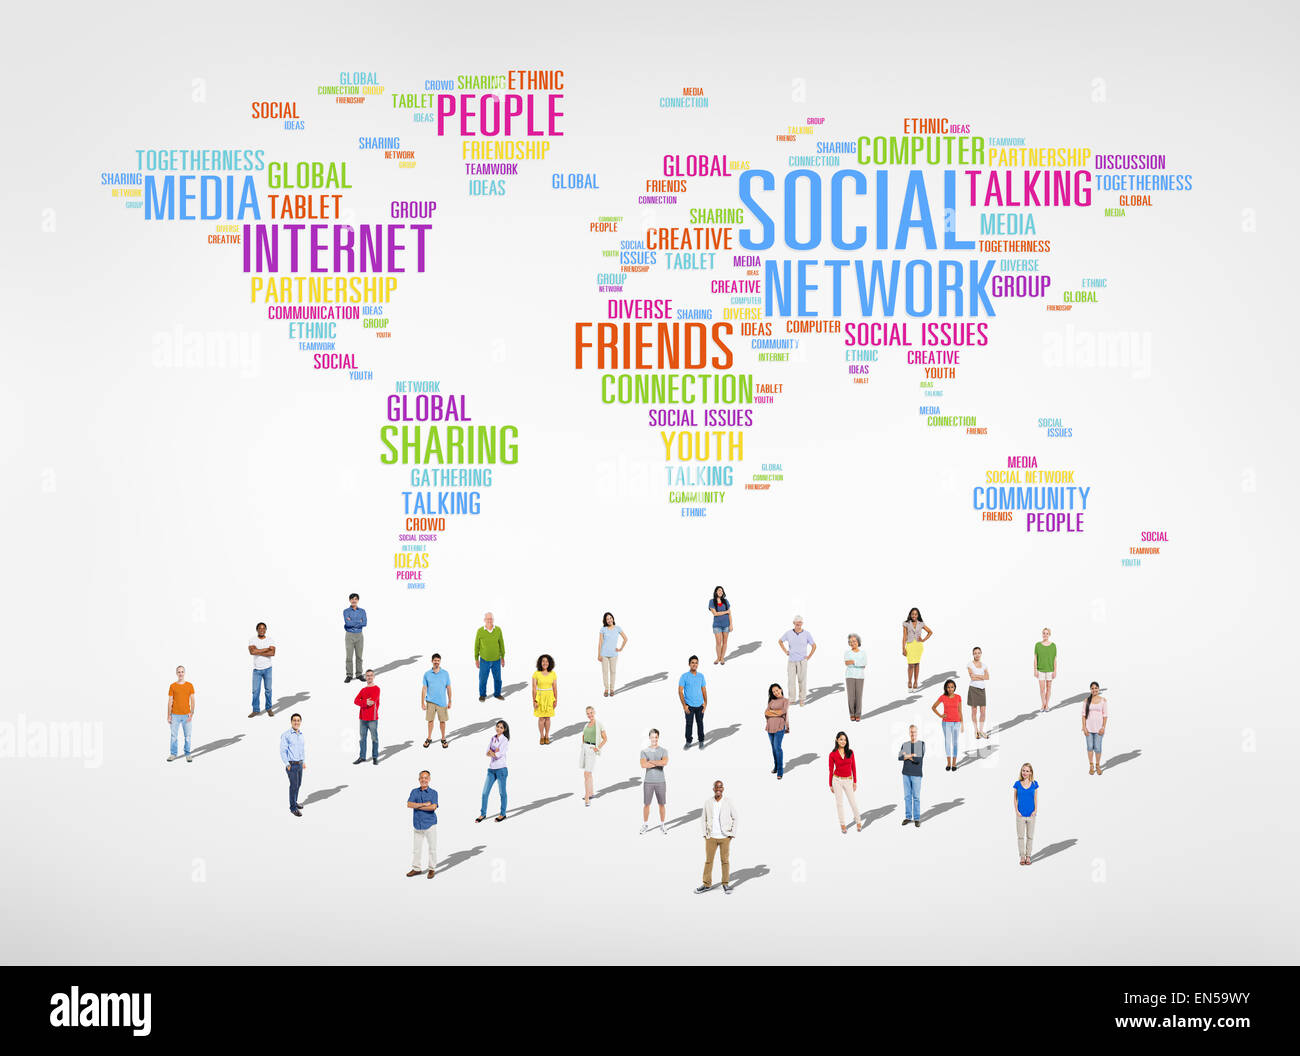 Global Sharing Social Networking Concept Stock Photo